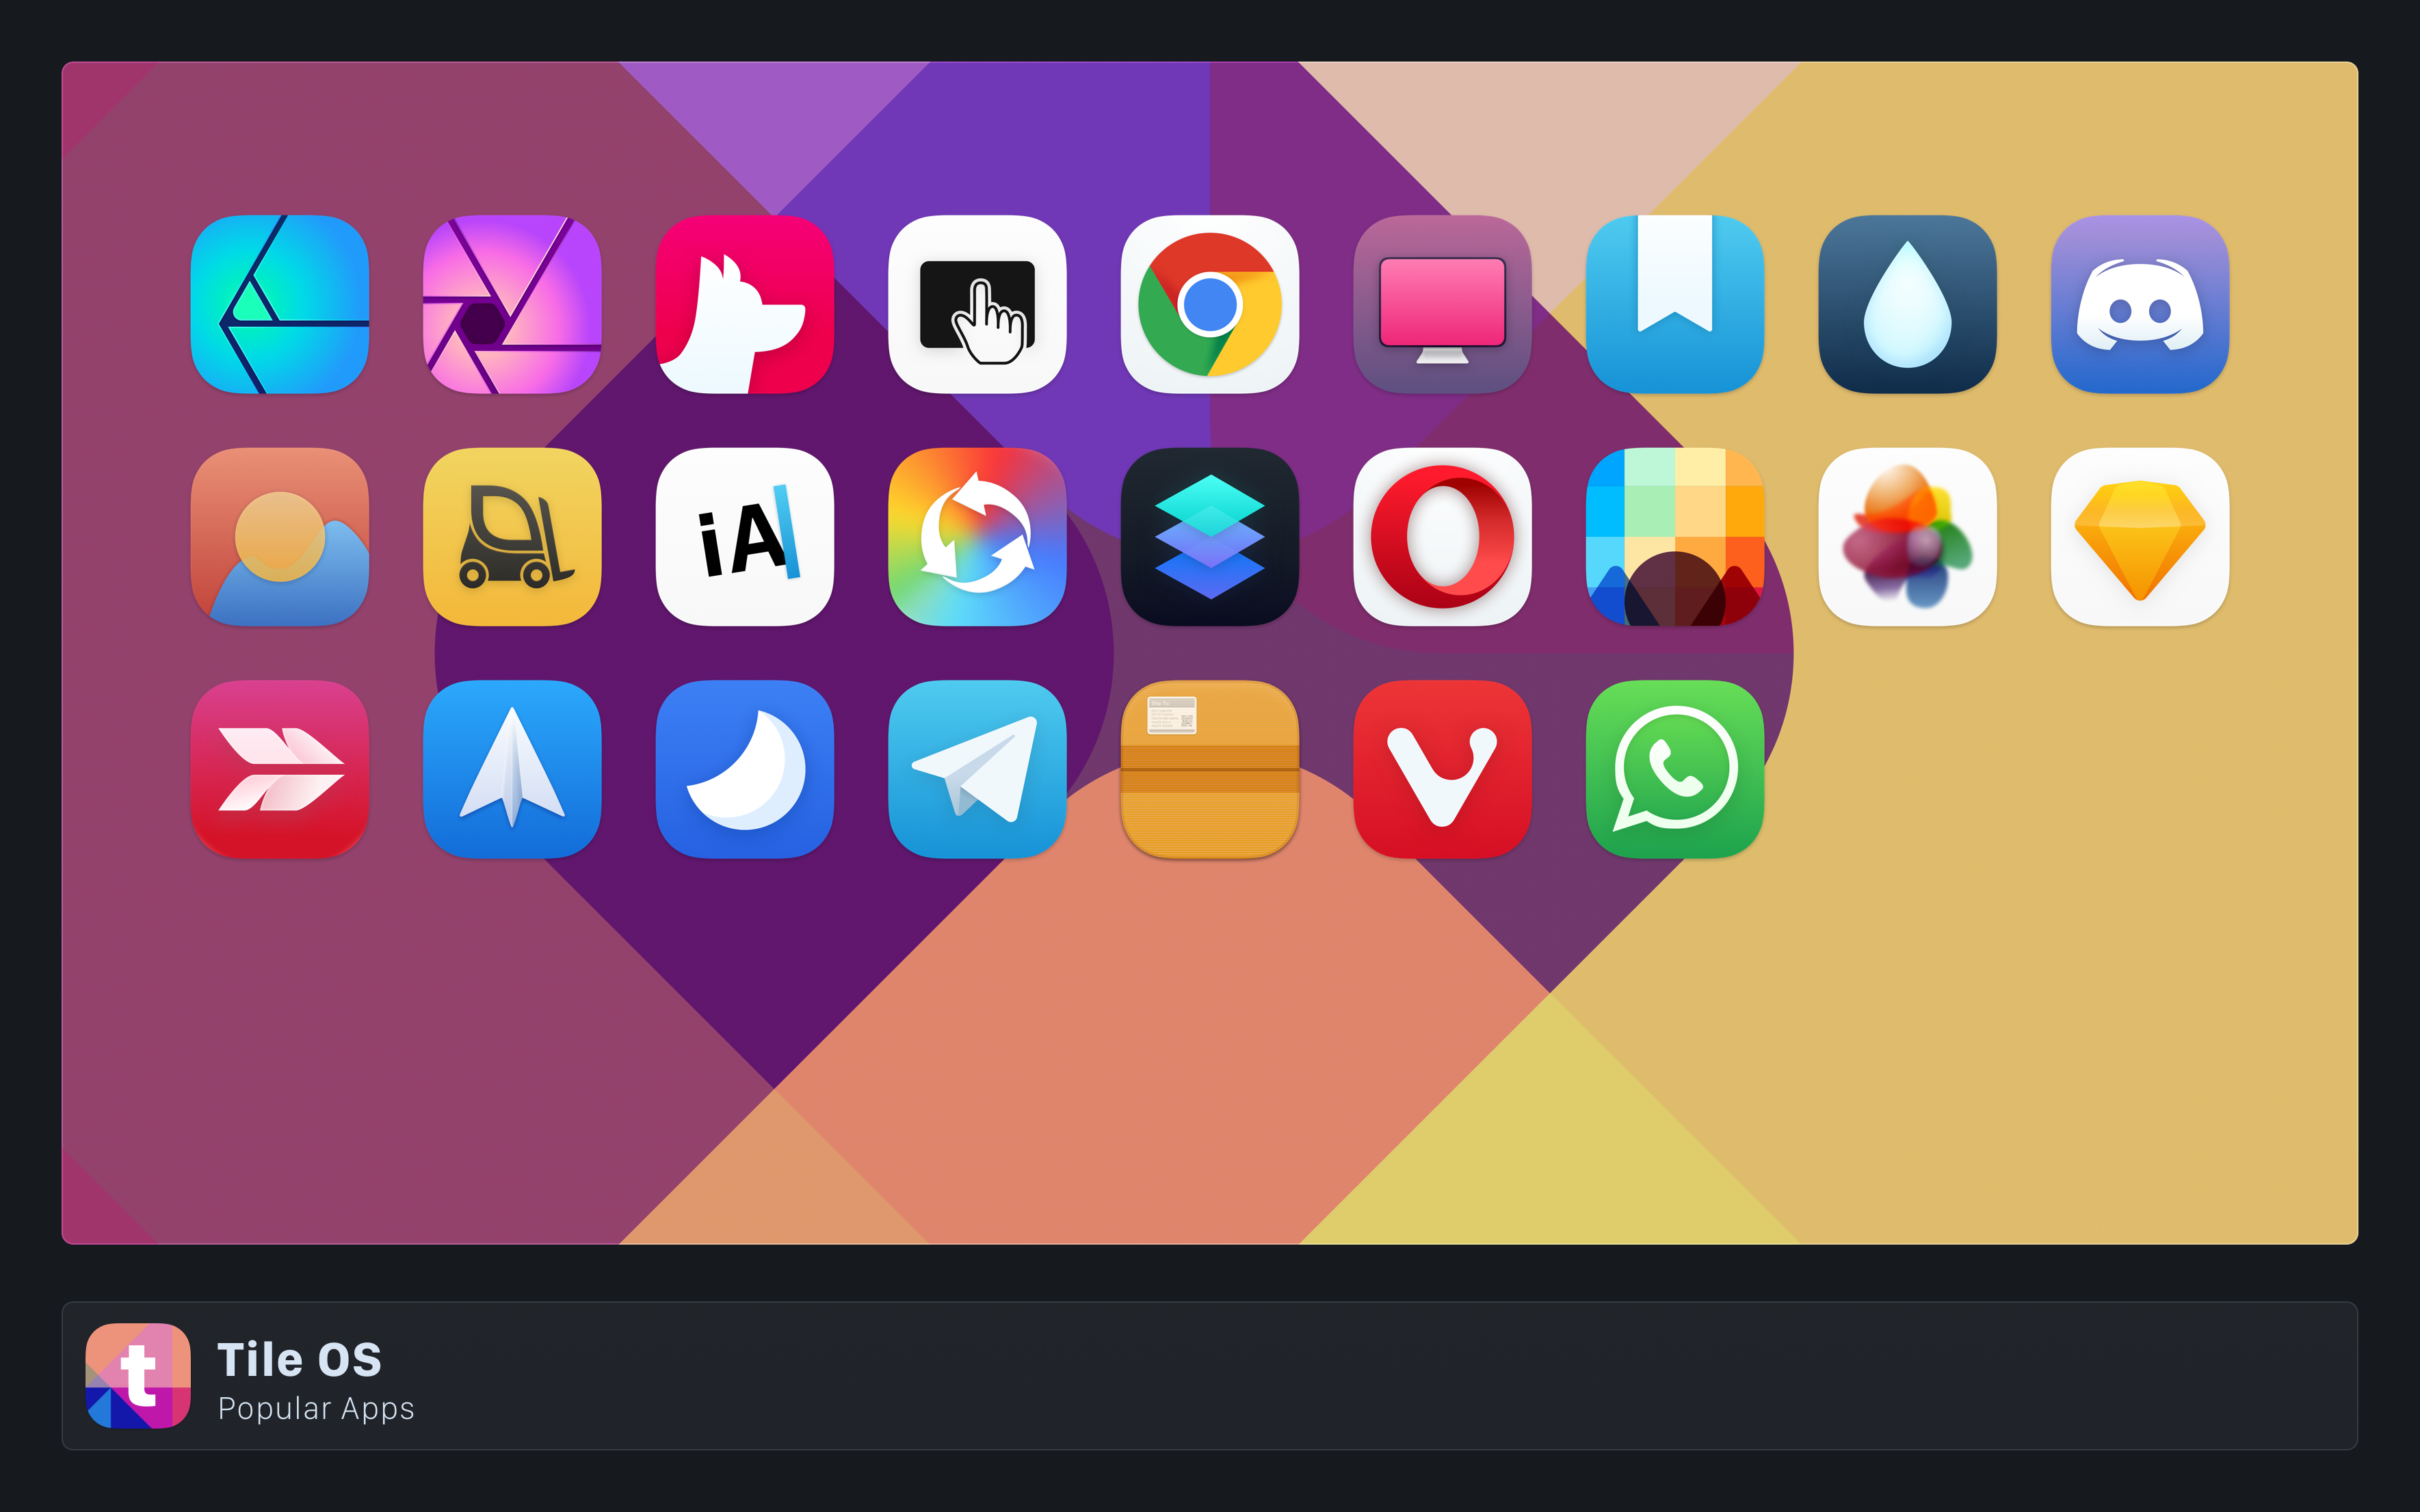 Tile OS - Part 3: Popular Apps Icons